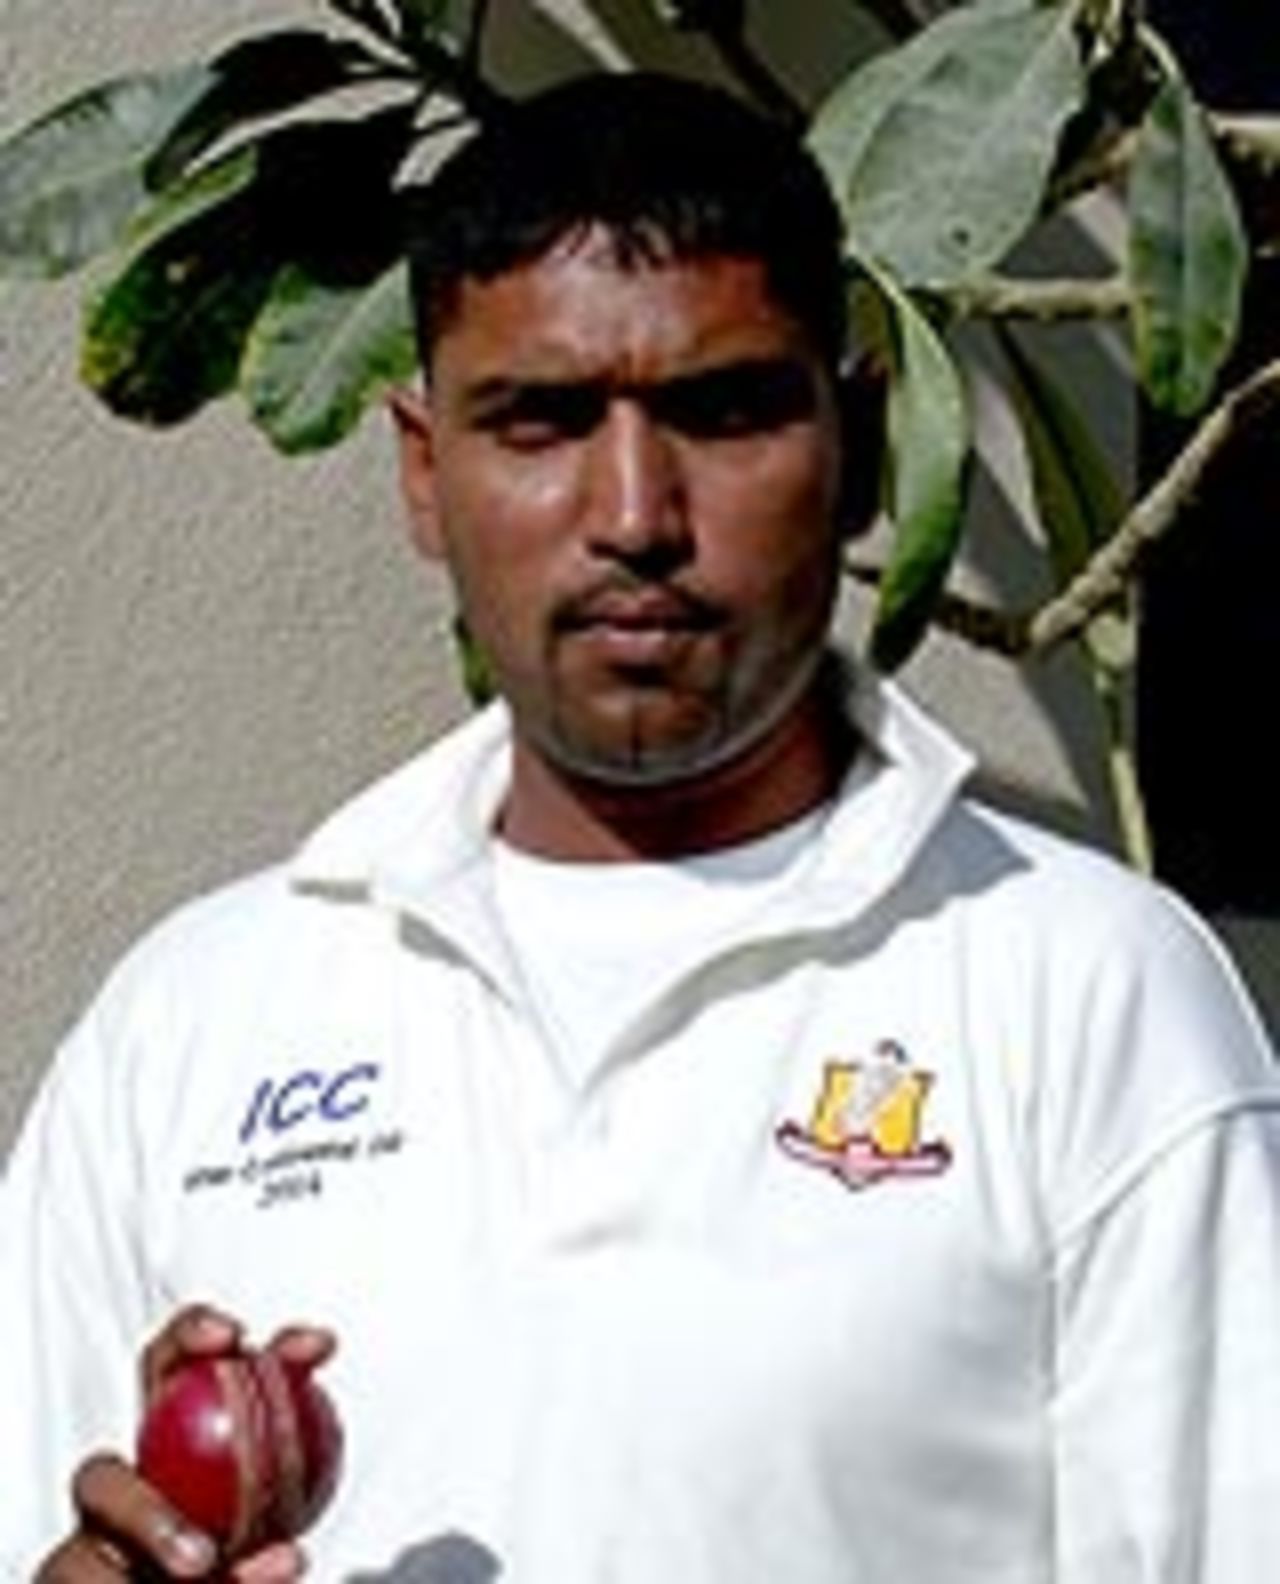 UAE fast bowler, Ali Asad, who took 9 for 74 against Nepal, March 26, 2004